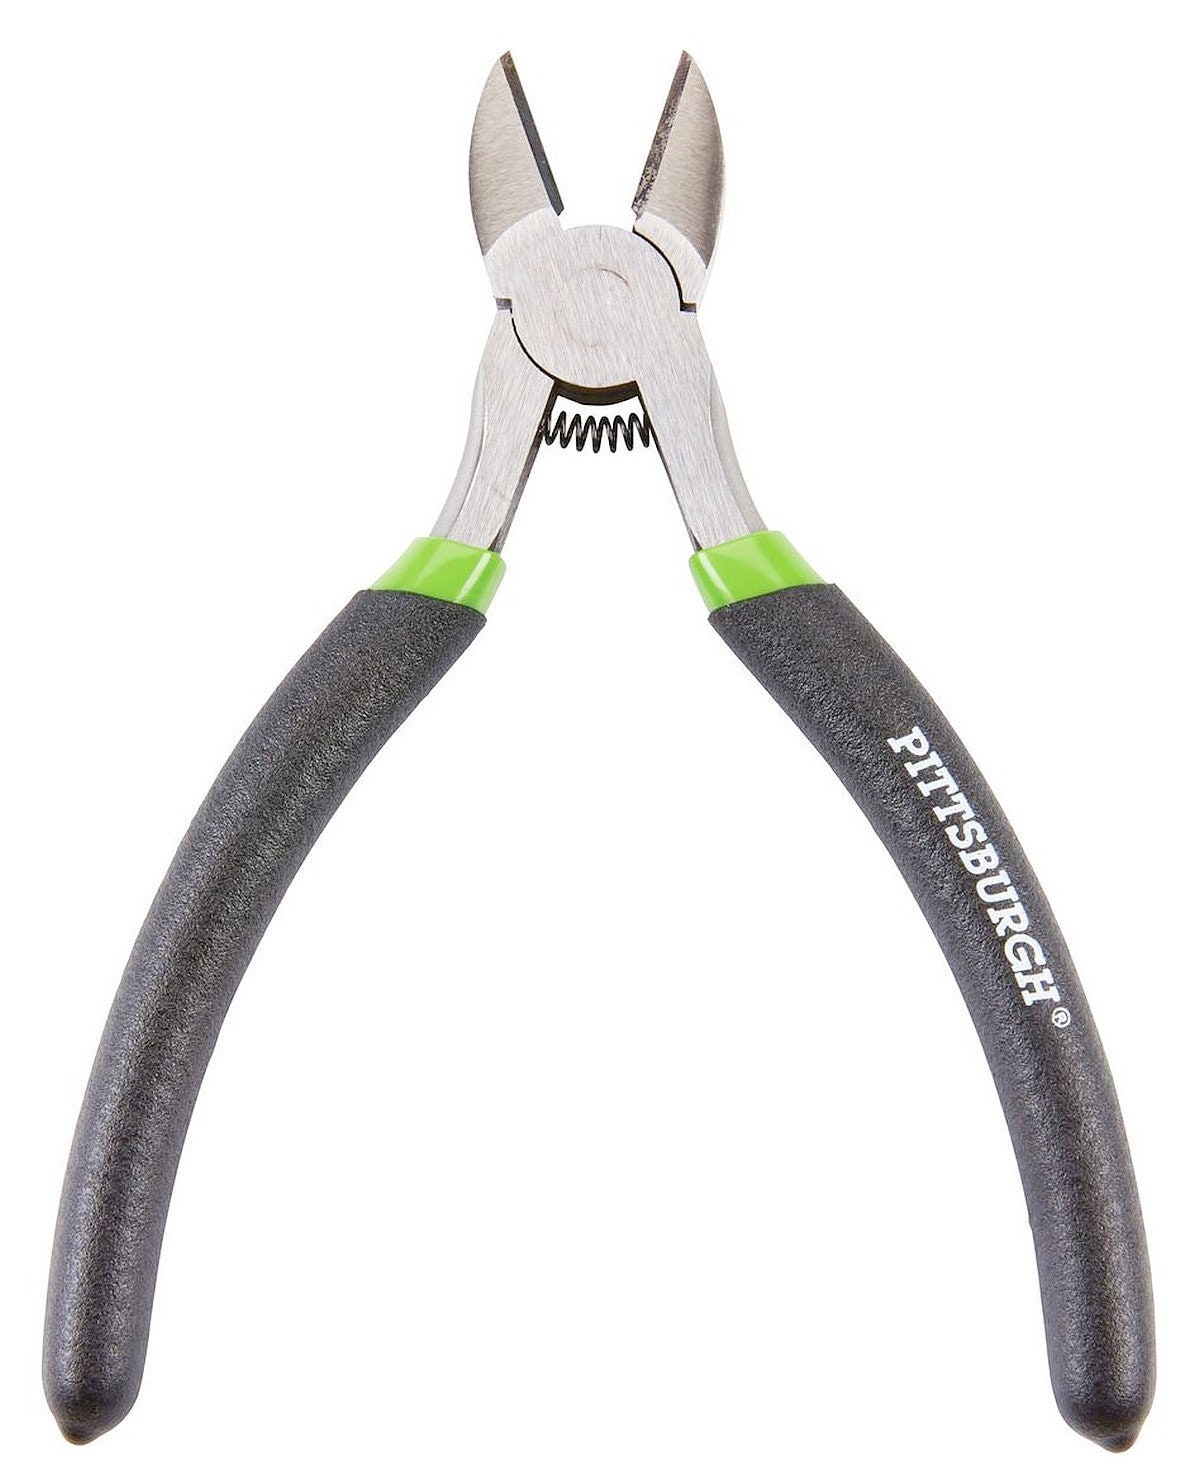 170 Wire Cutters Flush Cutter Pliers Set Dikes Wire Cutter for Crafts